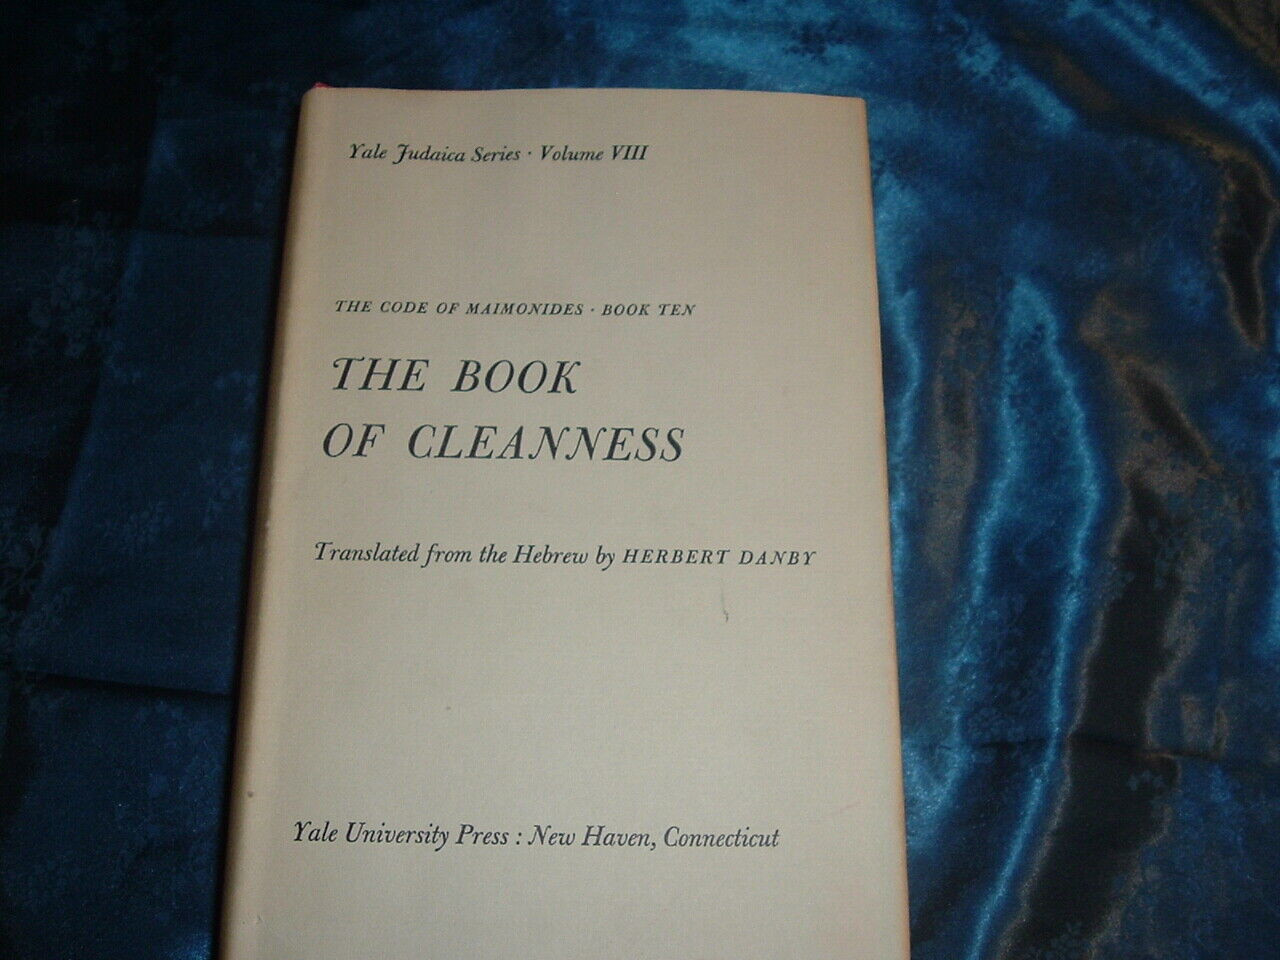 Herbert Danby: The Code of Maimonides Book Ten: The Book of Cleanness